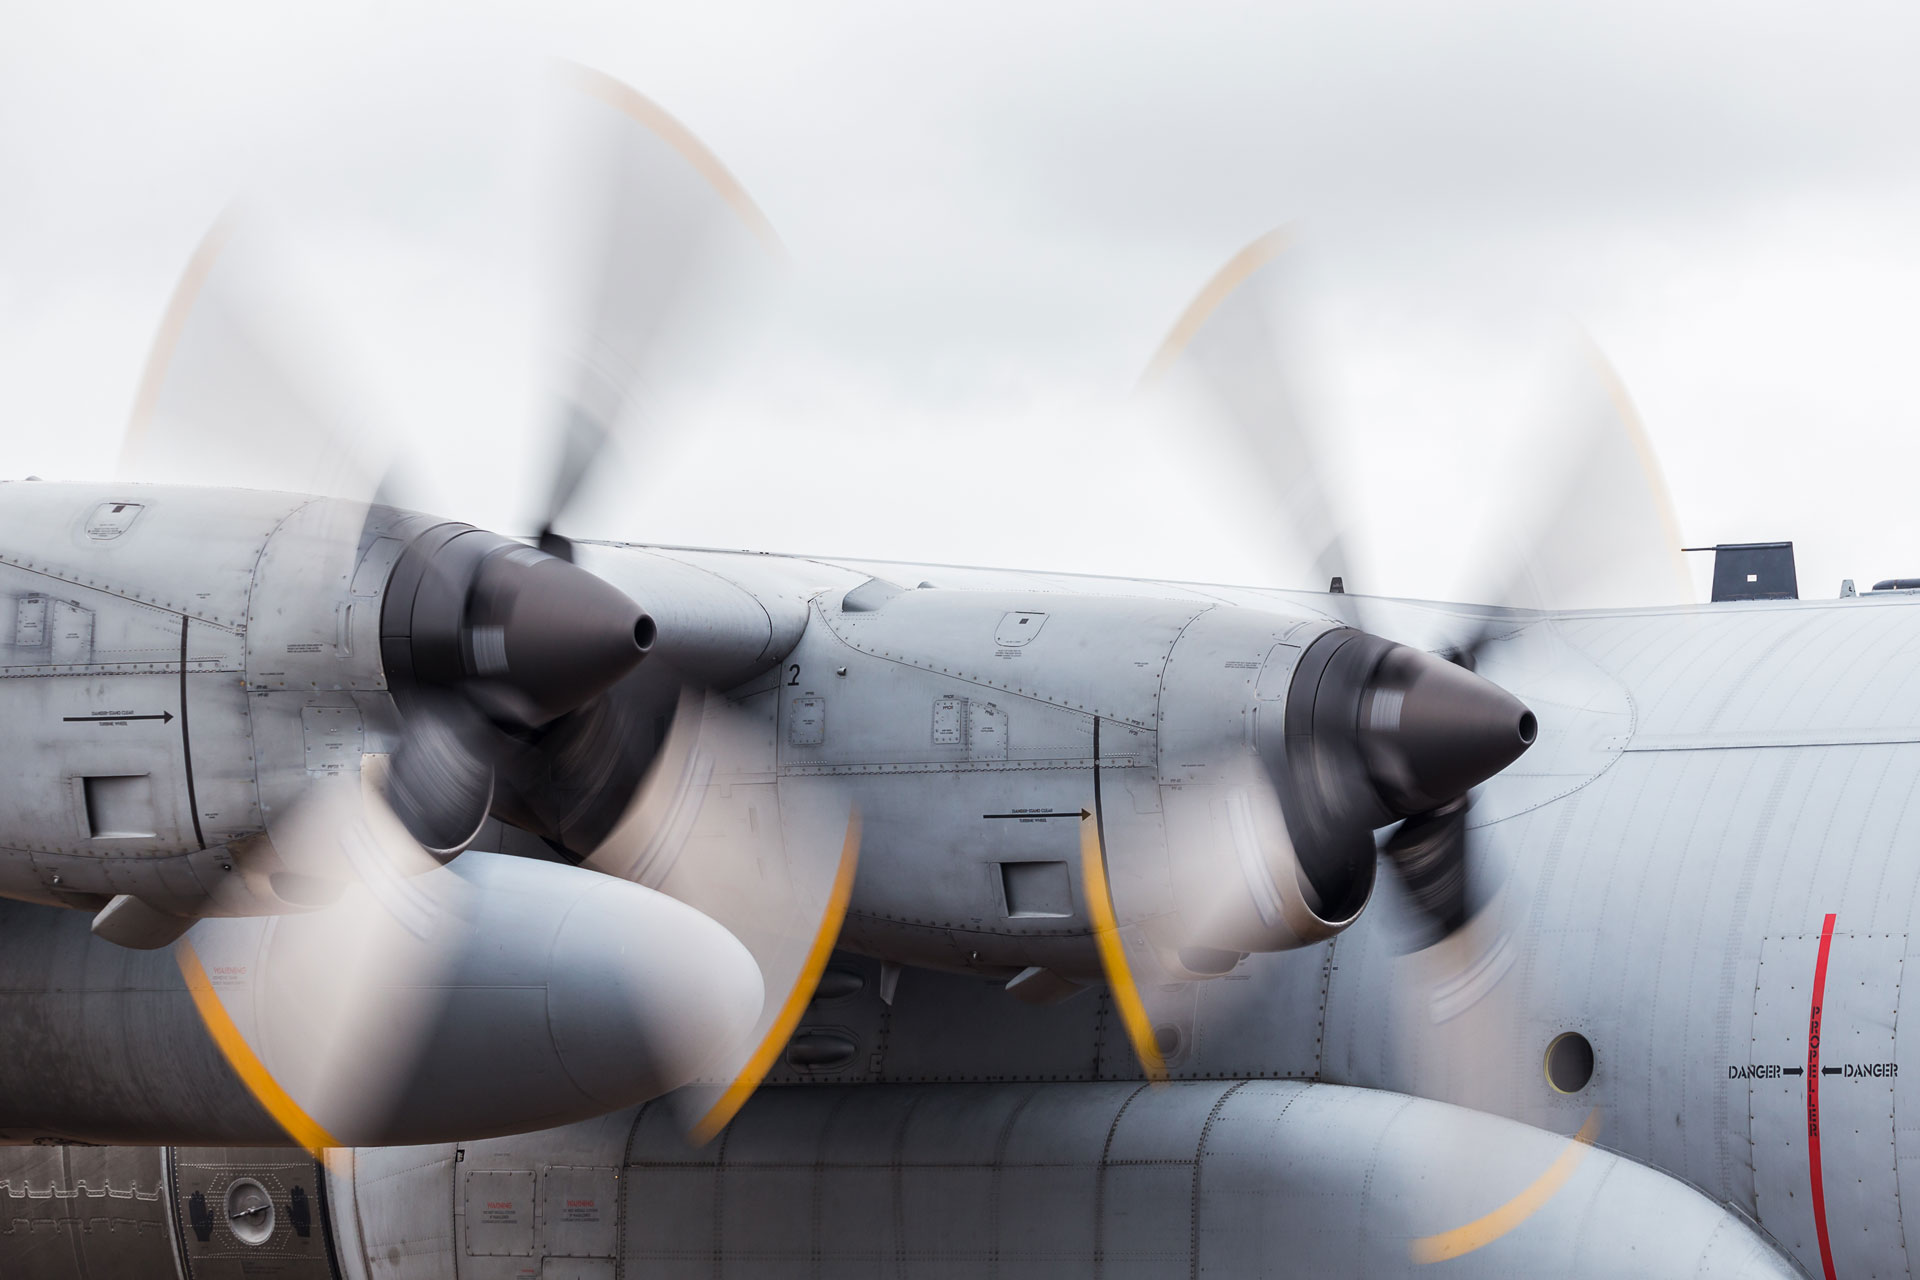 54H60-Military-Standard-Propeller-Repair-&-Servicing-for-C130-L100-&-P30-Props-by-the-Segers-Group